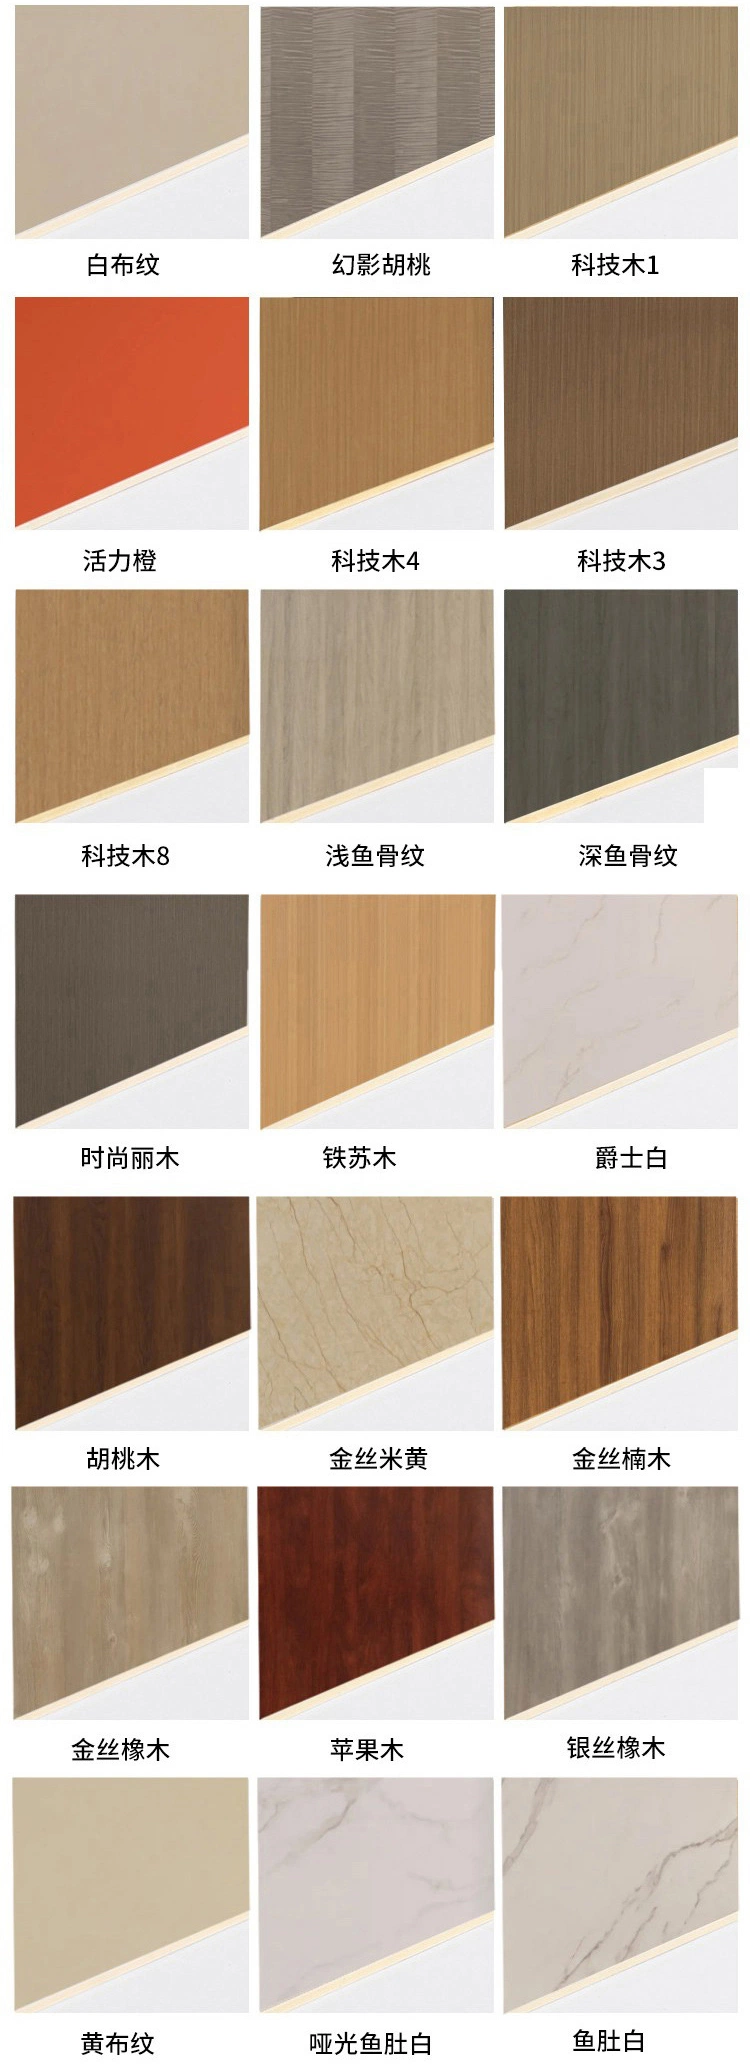 Hot Sale Interior Decorative WPC PVC Integrated Panel for Wall Decor